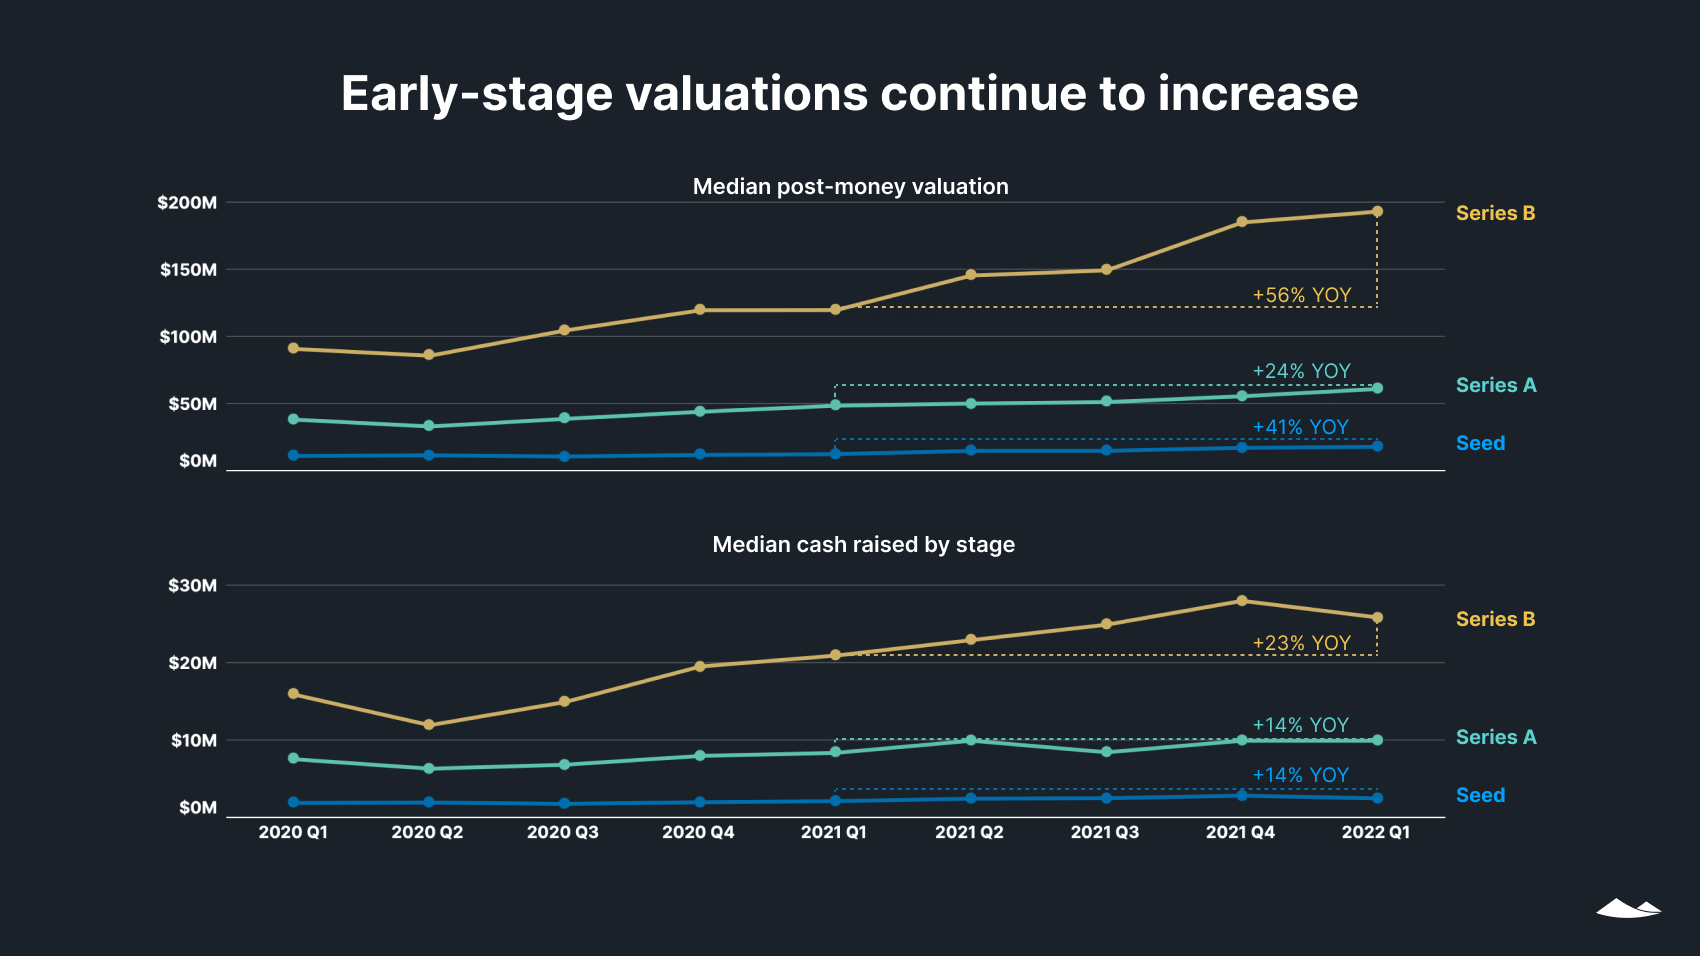 Two line charts show median post-money valuation and median cash raised by stage from2020 Q1 to 2022 Q1. Valuations increased at all early stages and raise sizes declined in Q1 for seed and Series B.